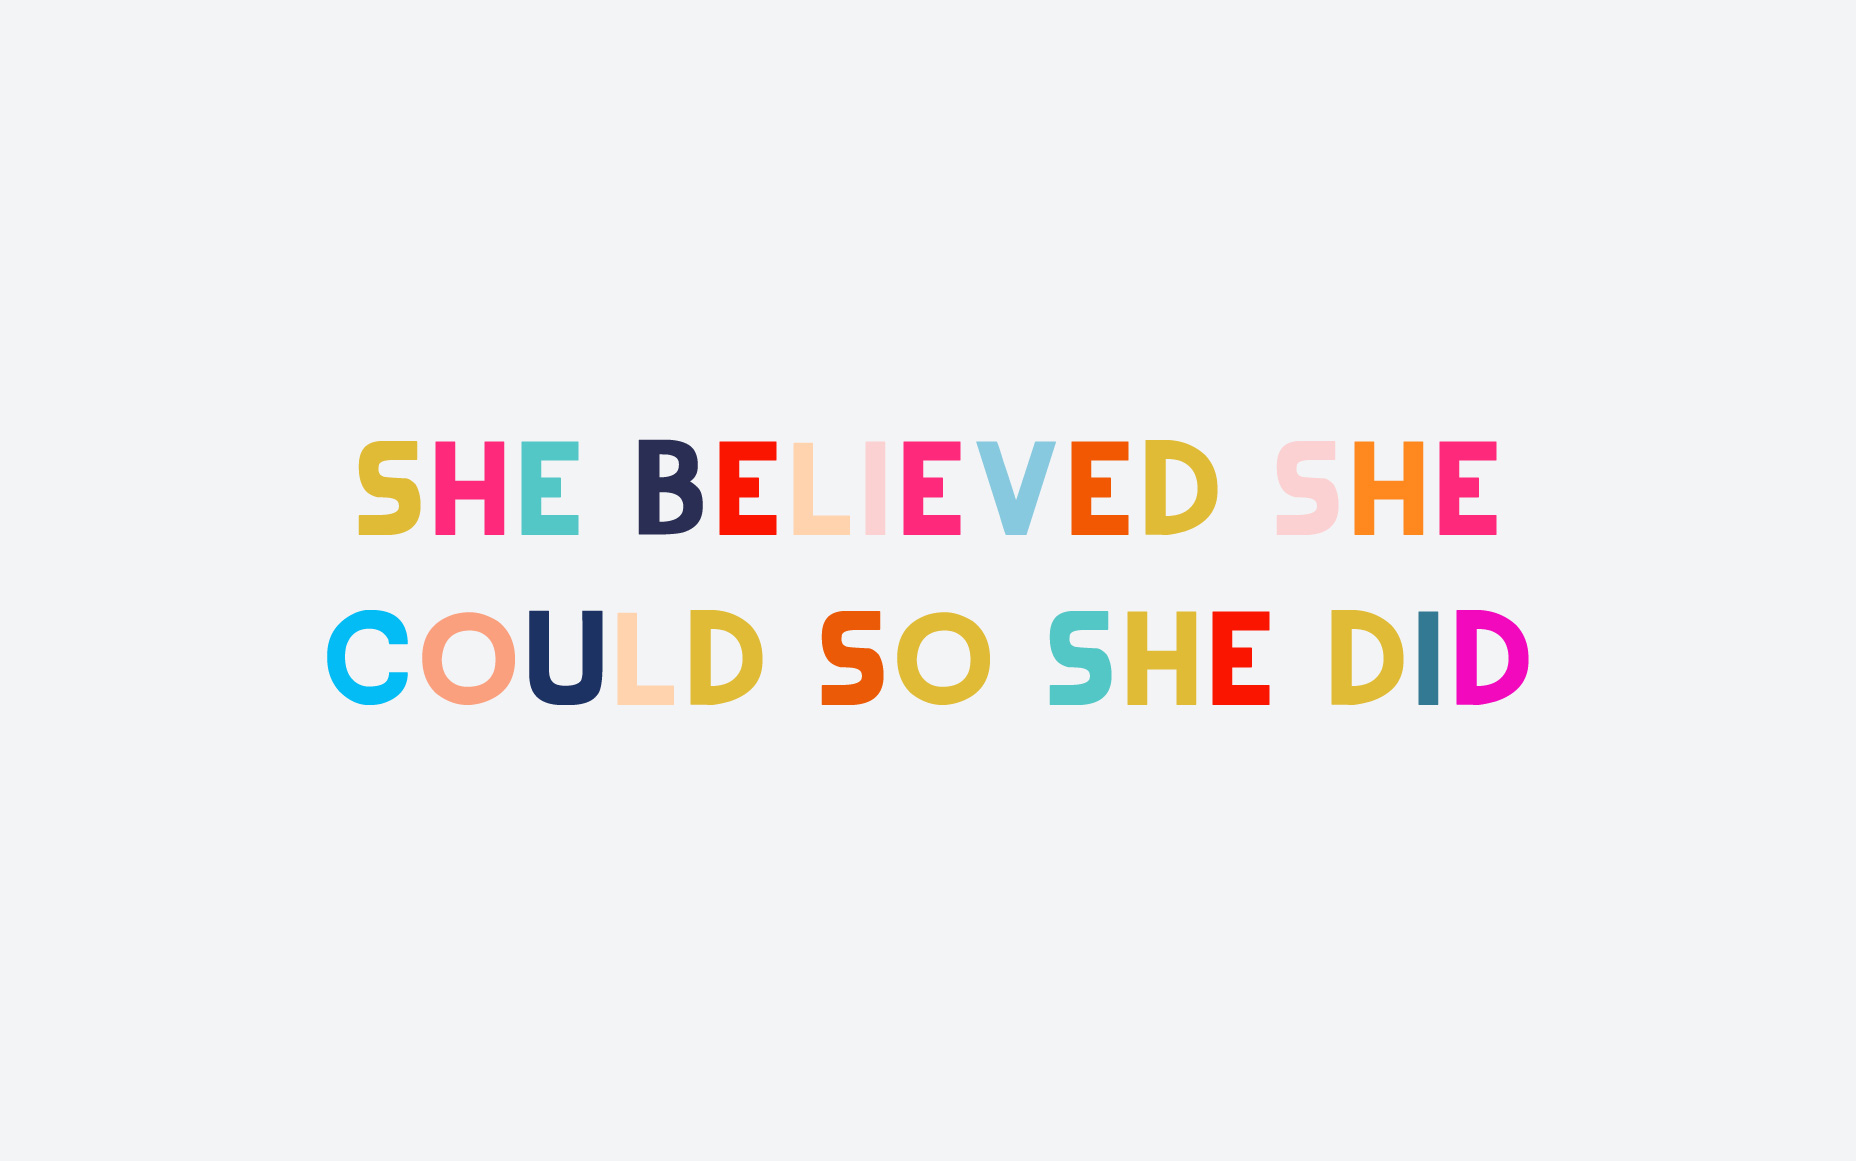 Wallpaper-She-Believed-She-Could-So-She-Did-Wallpaper2